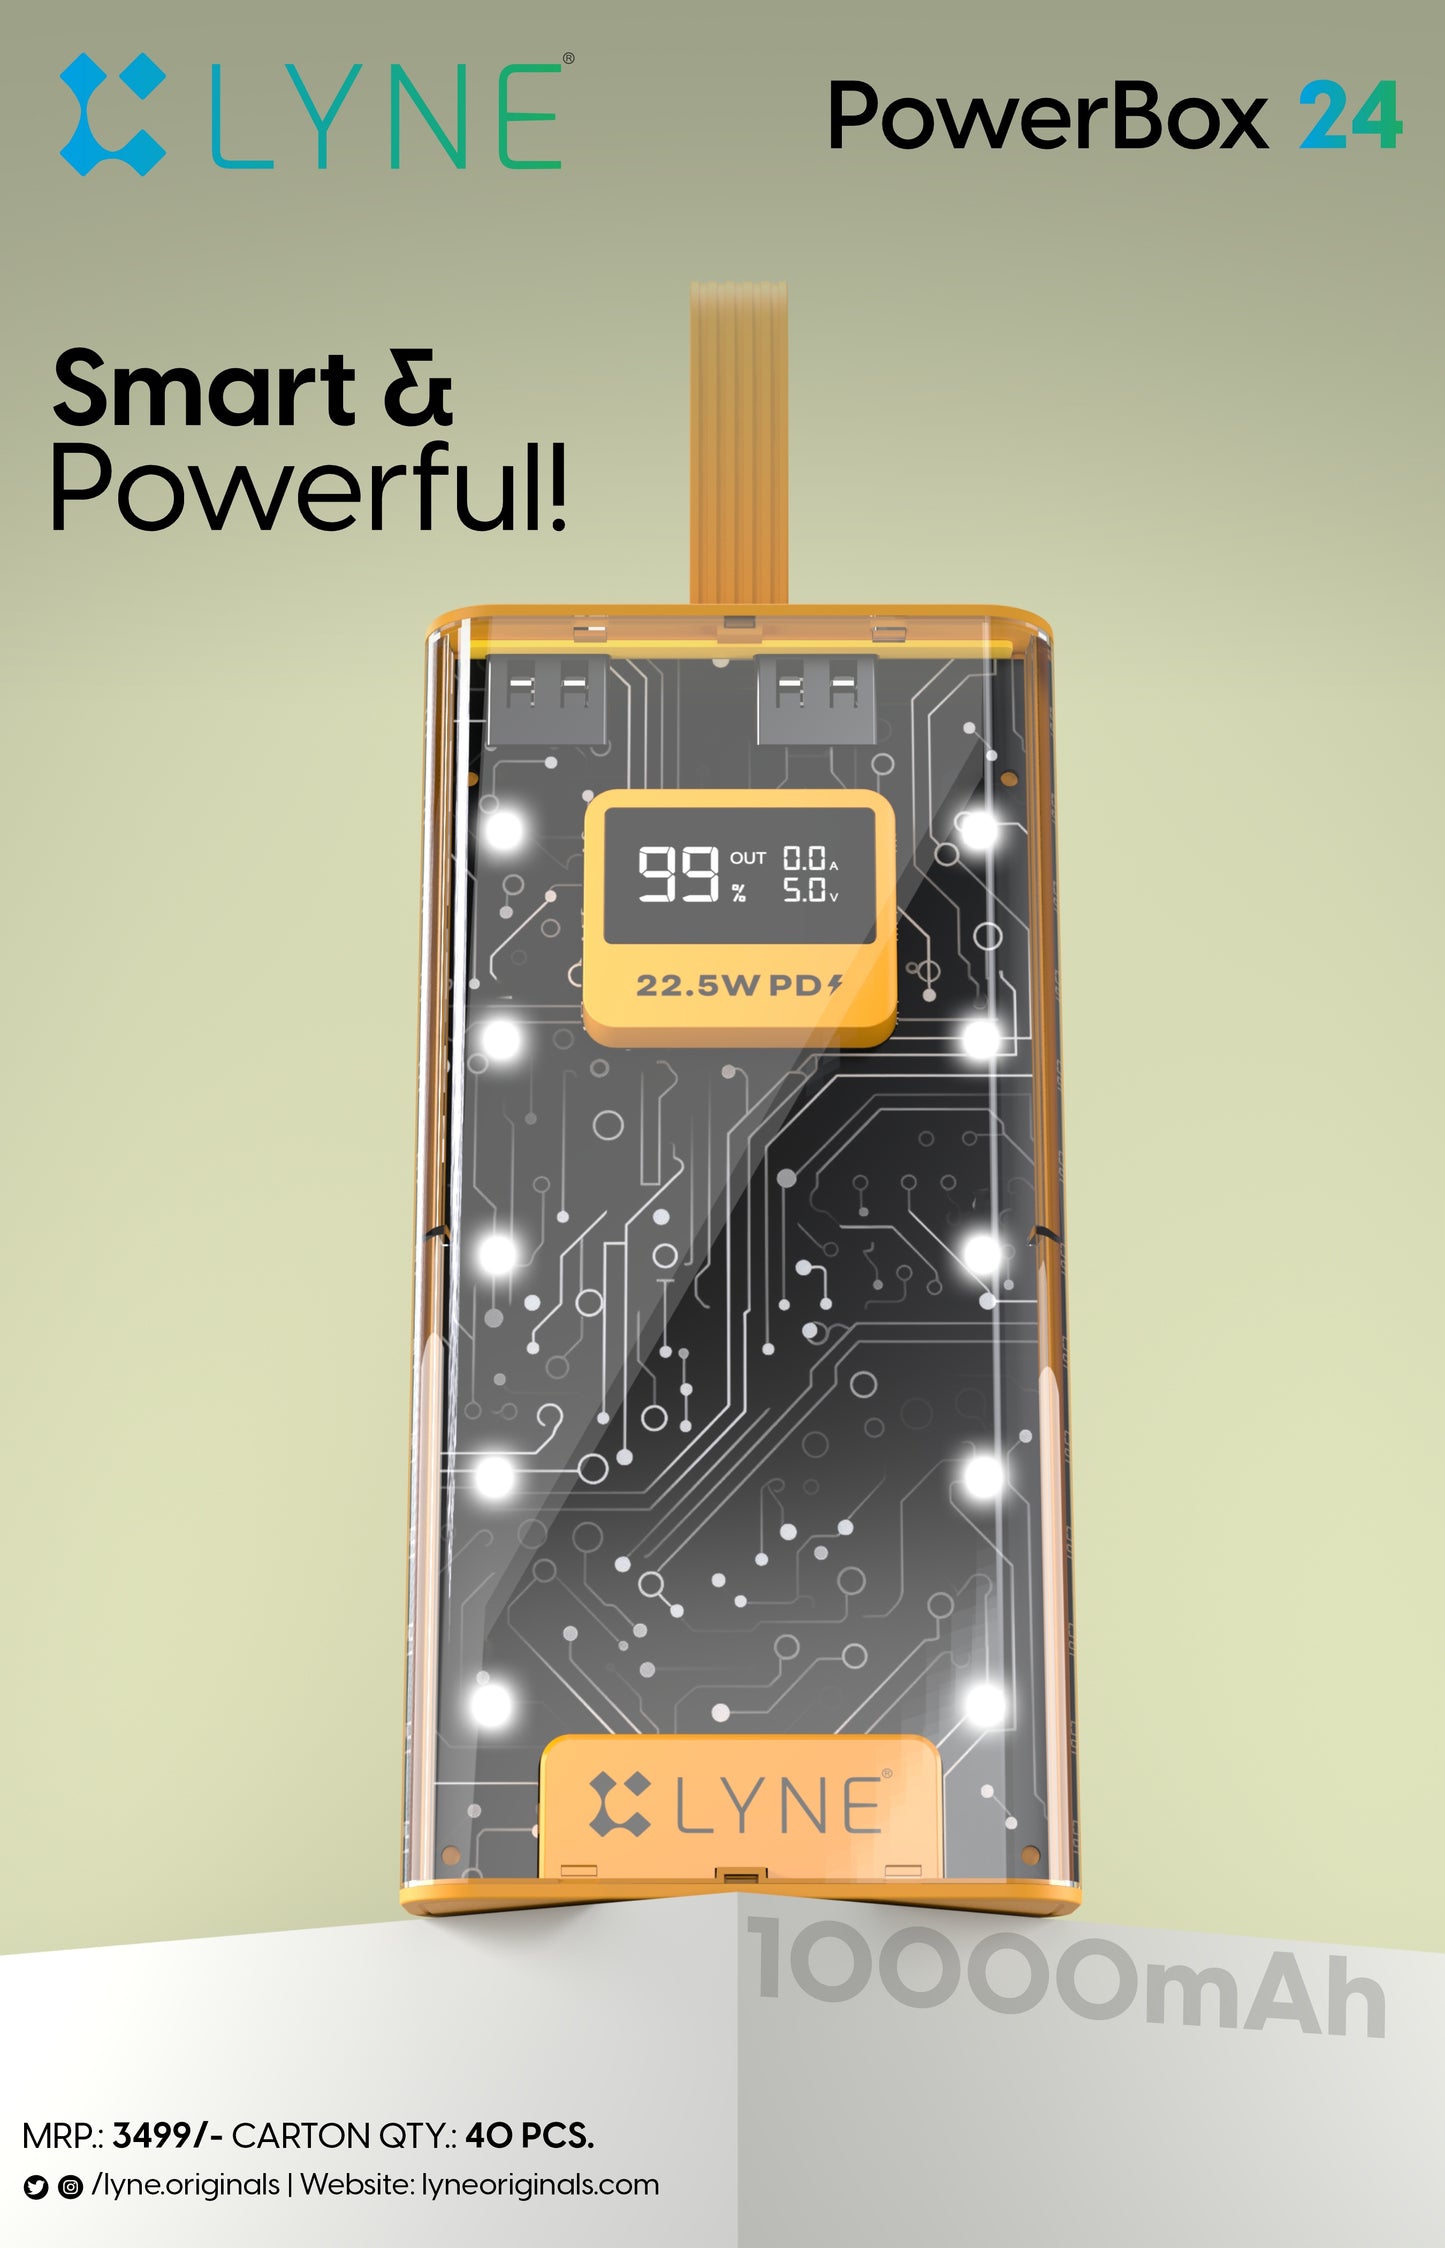 LYNE Powerbox 24 10000 mAh Battery Capacity, 22.5W PD Output with LED Panel